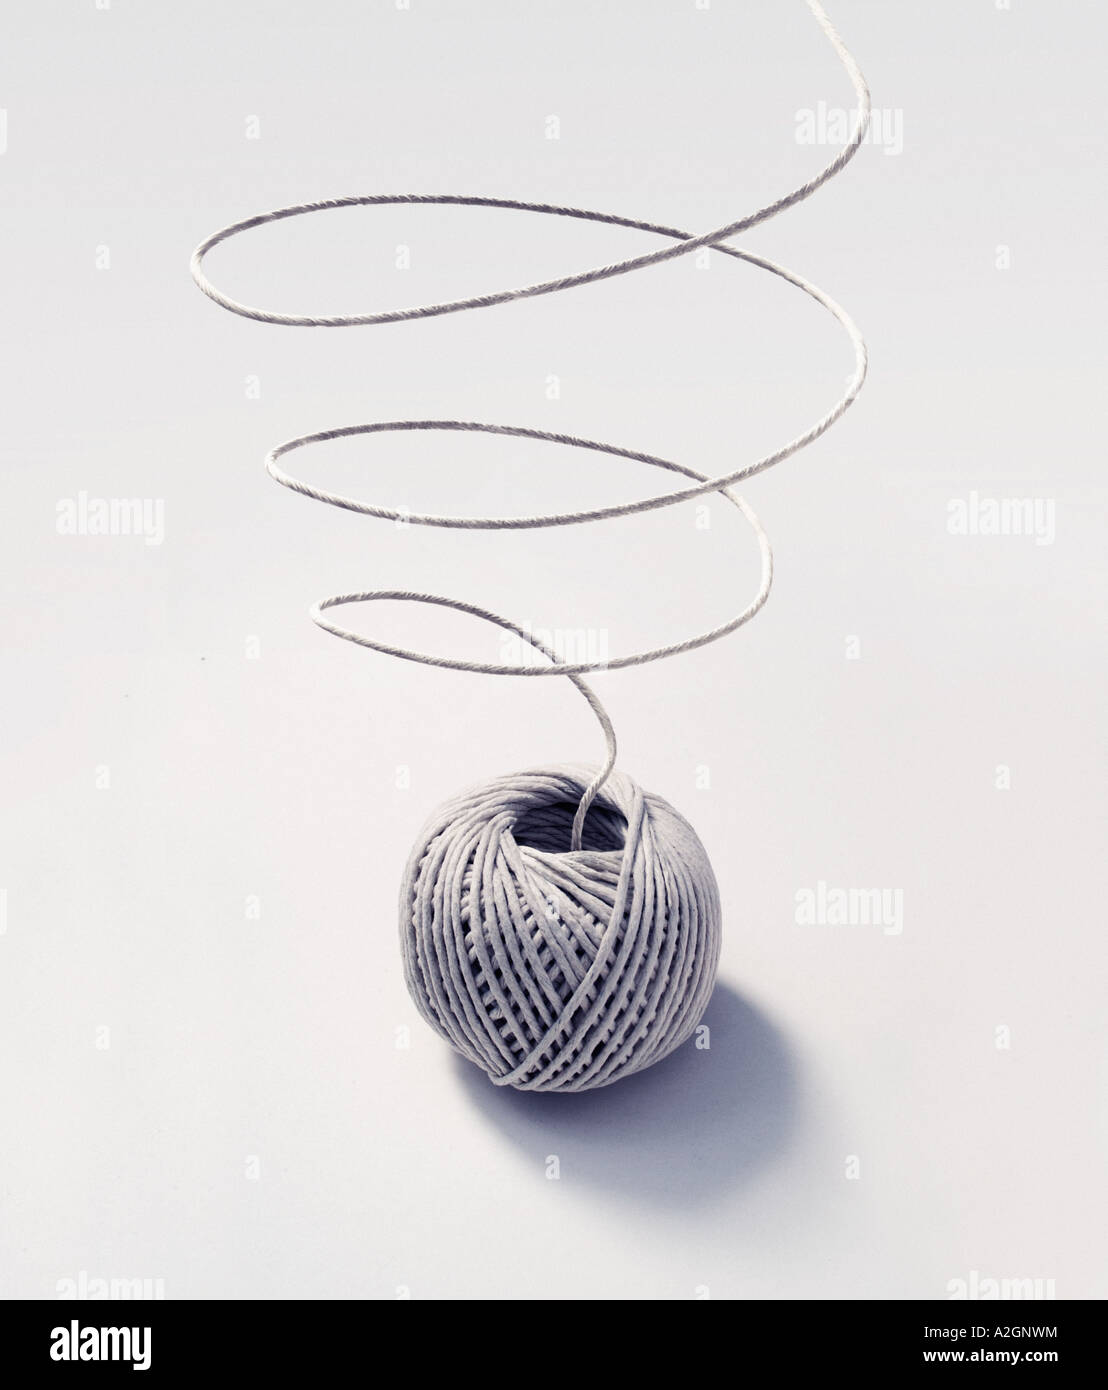 Ball of string on a white background, with loose string in a coil Stock Photo